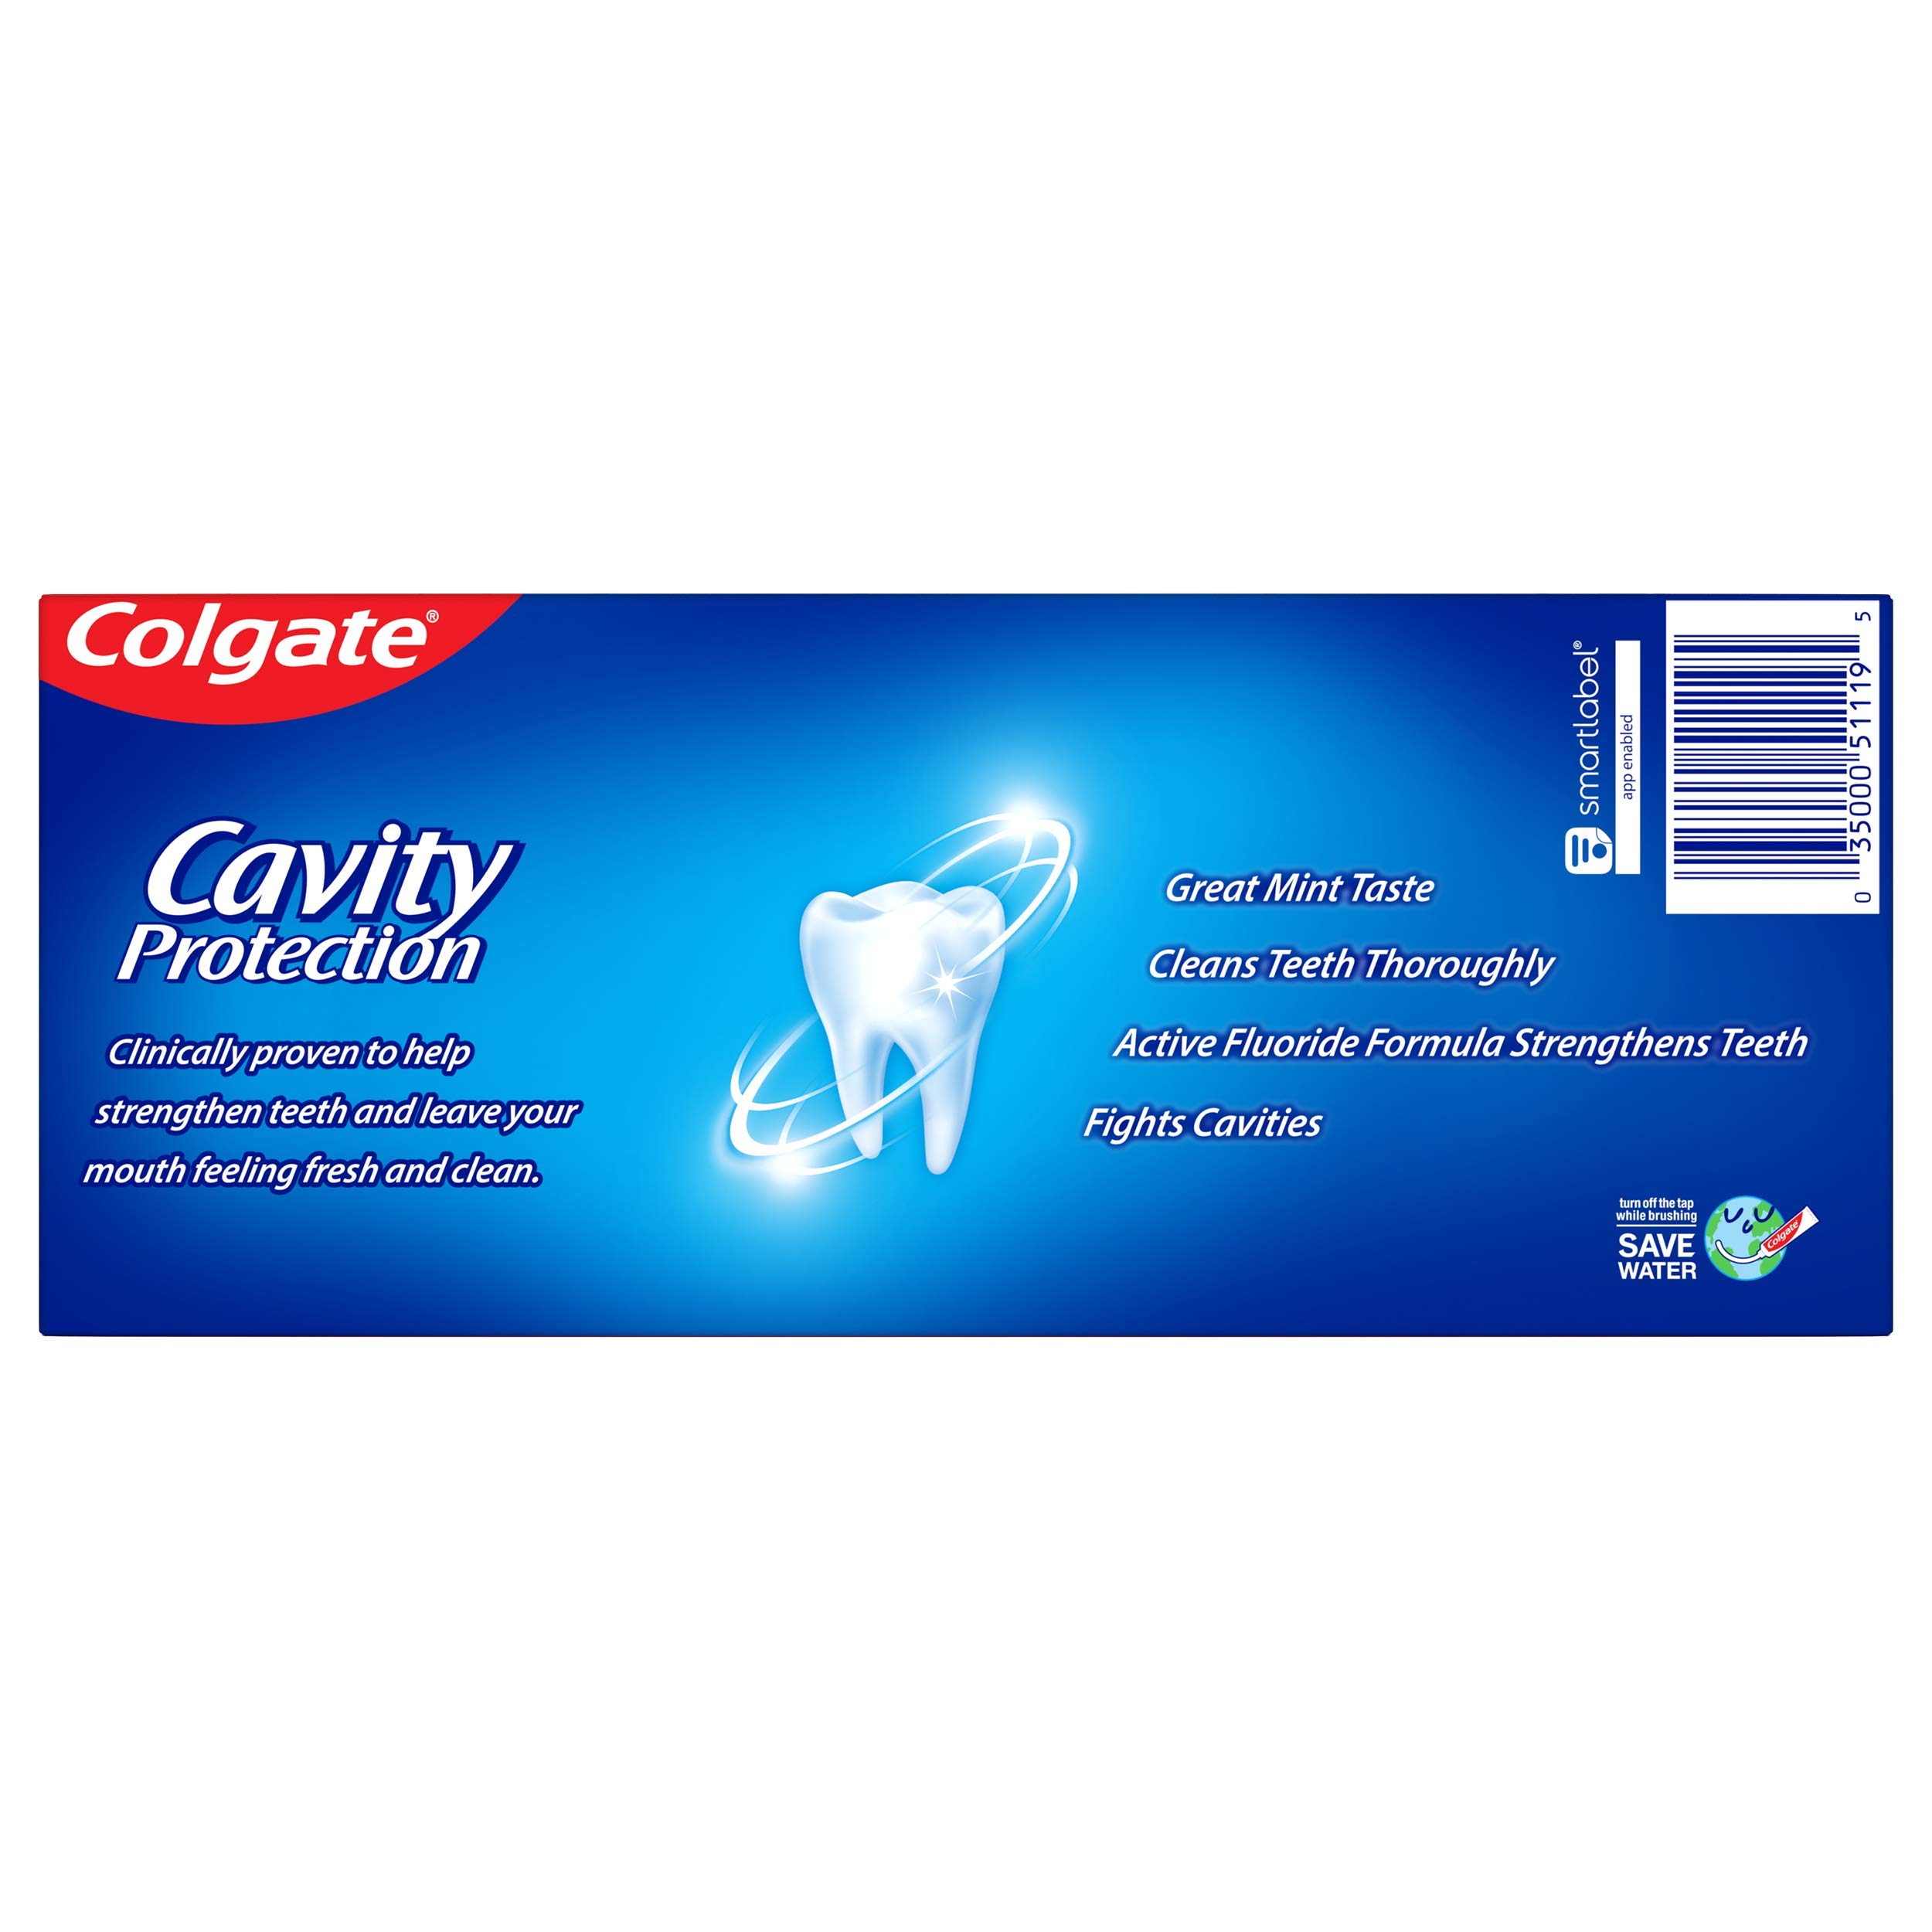 Colgate Cavity Protection Toothpaste with Fluoride - 6 Ounce (Pack of 2)